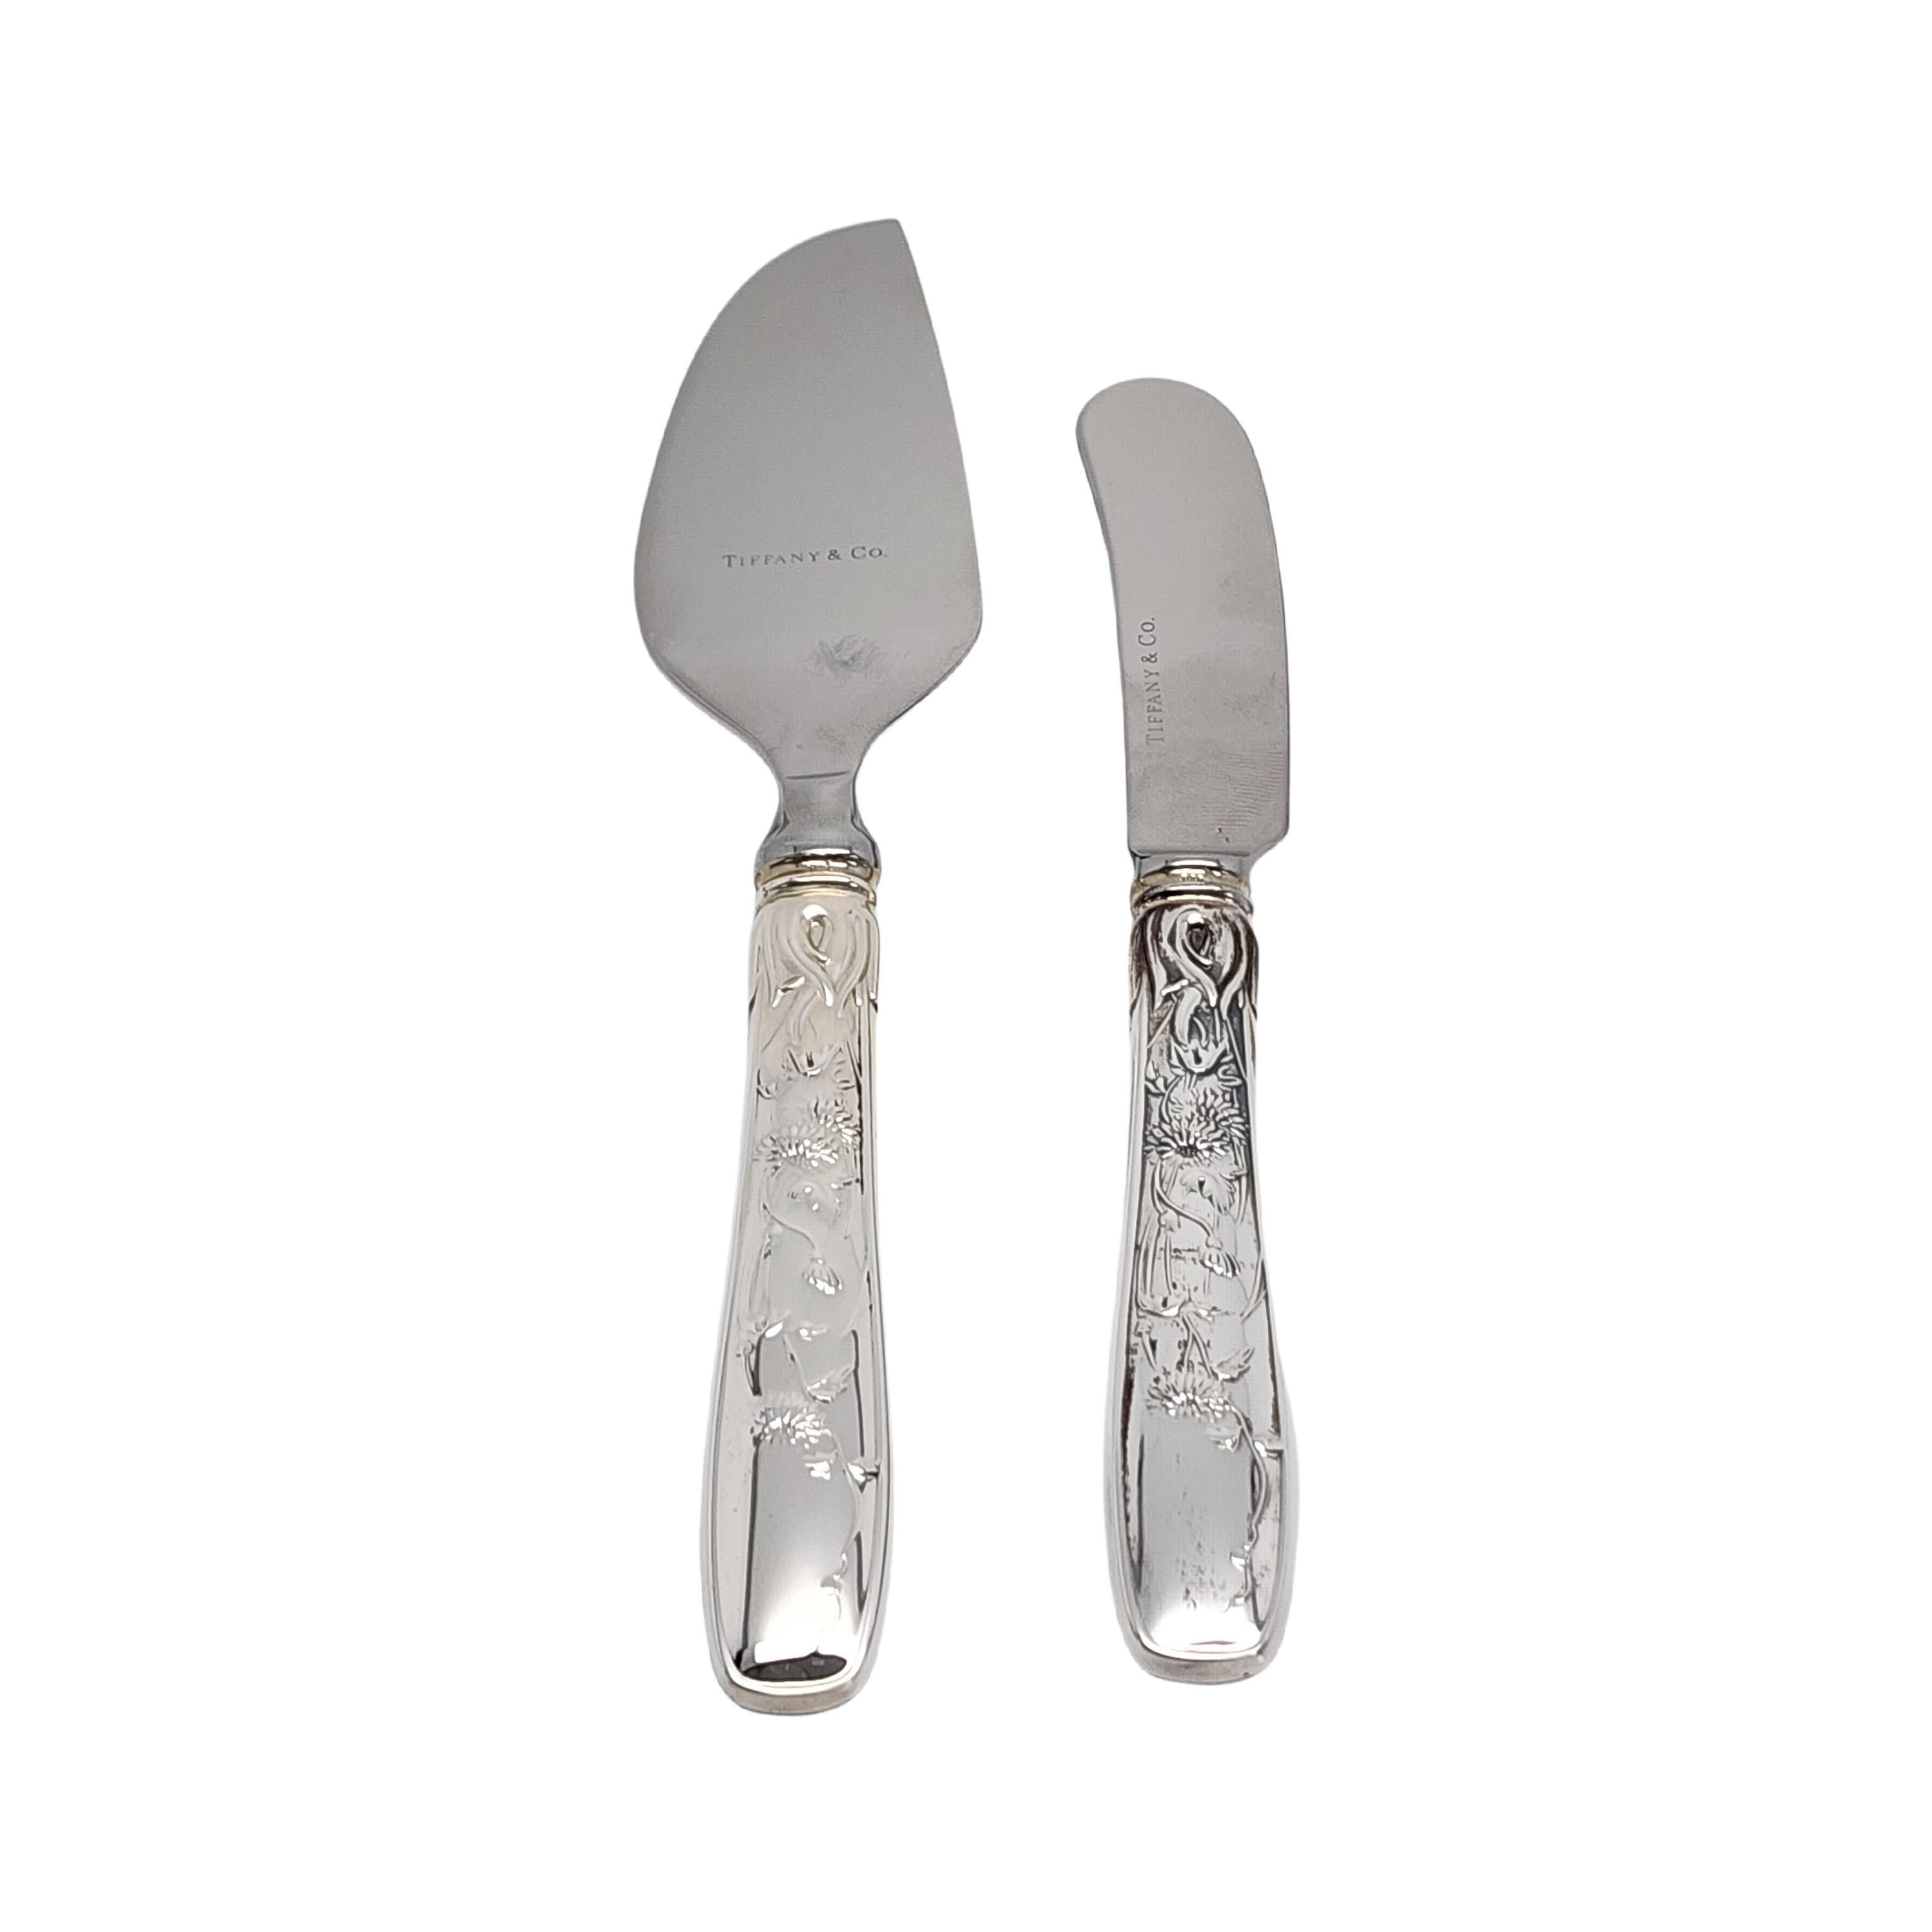 Sterling silver handle stainless blade Cheese Knife and Spreader Set by Tiffany & Co in the Audubon pattern with pouches and boxes.

No monogram

Designed by Edward C. Moore in 1871, the Audubon pattern was inspired by Japanese bird paintings of the